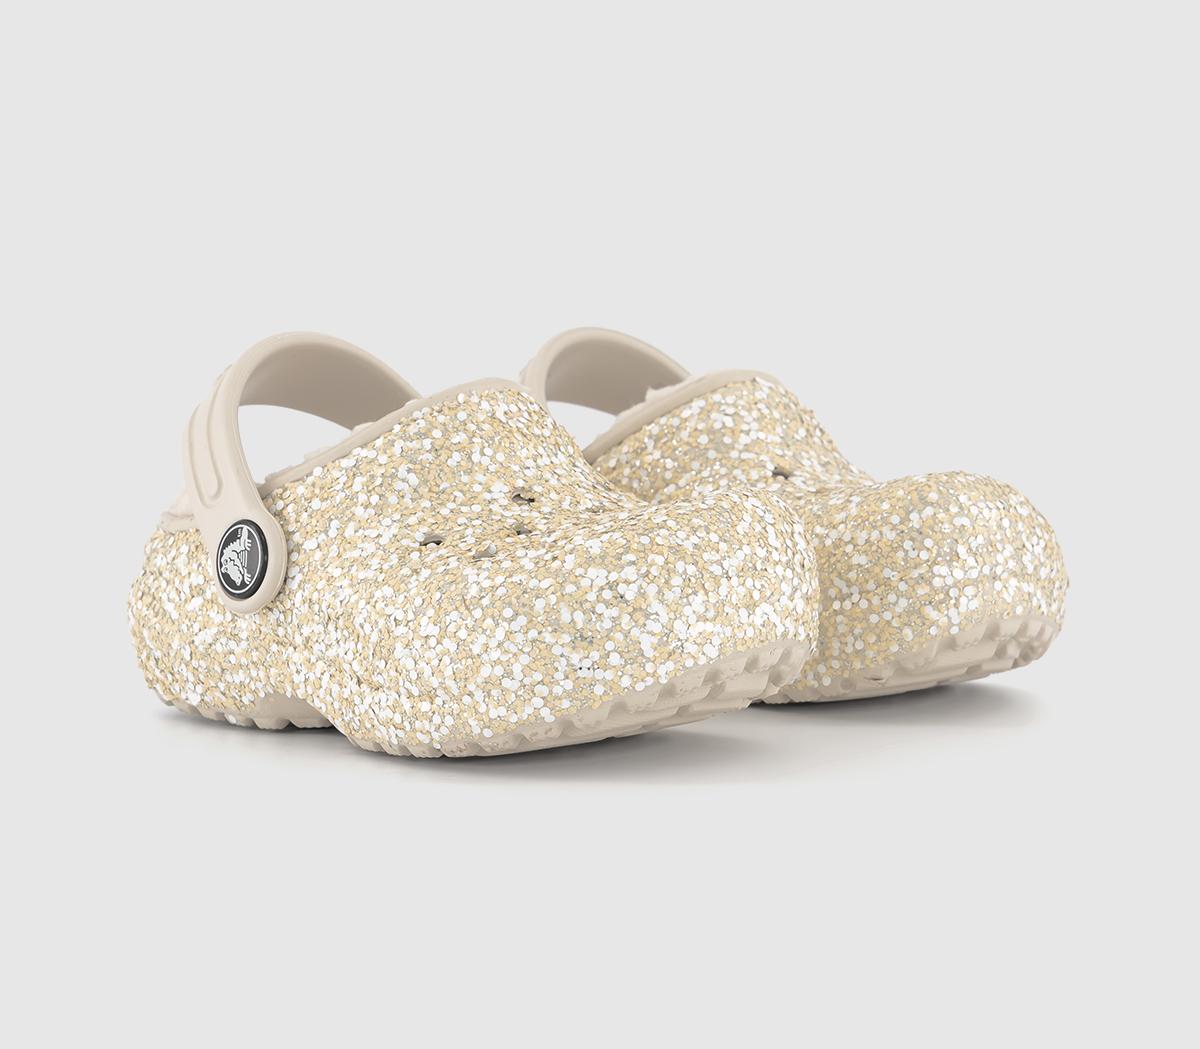 Crocs Kids Classic Lined Toddler Clogs Stucco Glitter Natural, 9infant